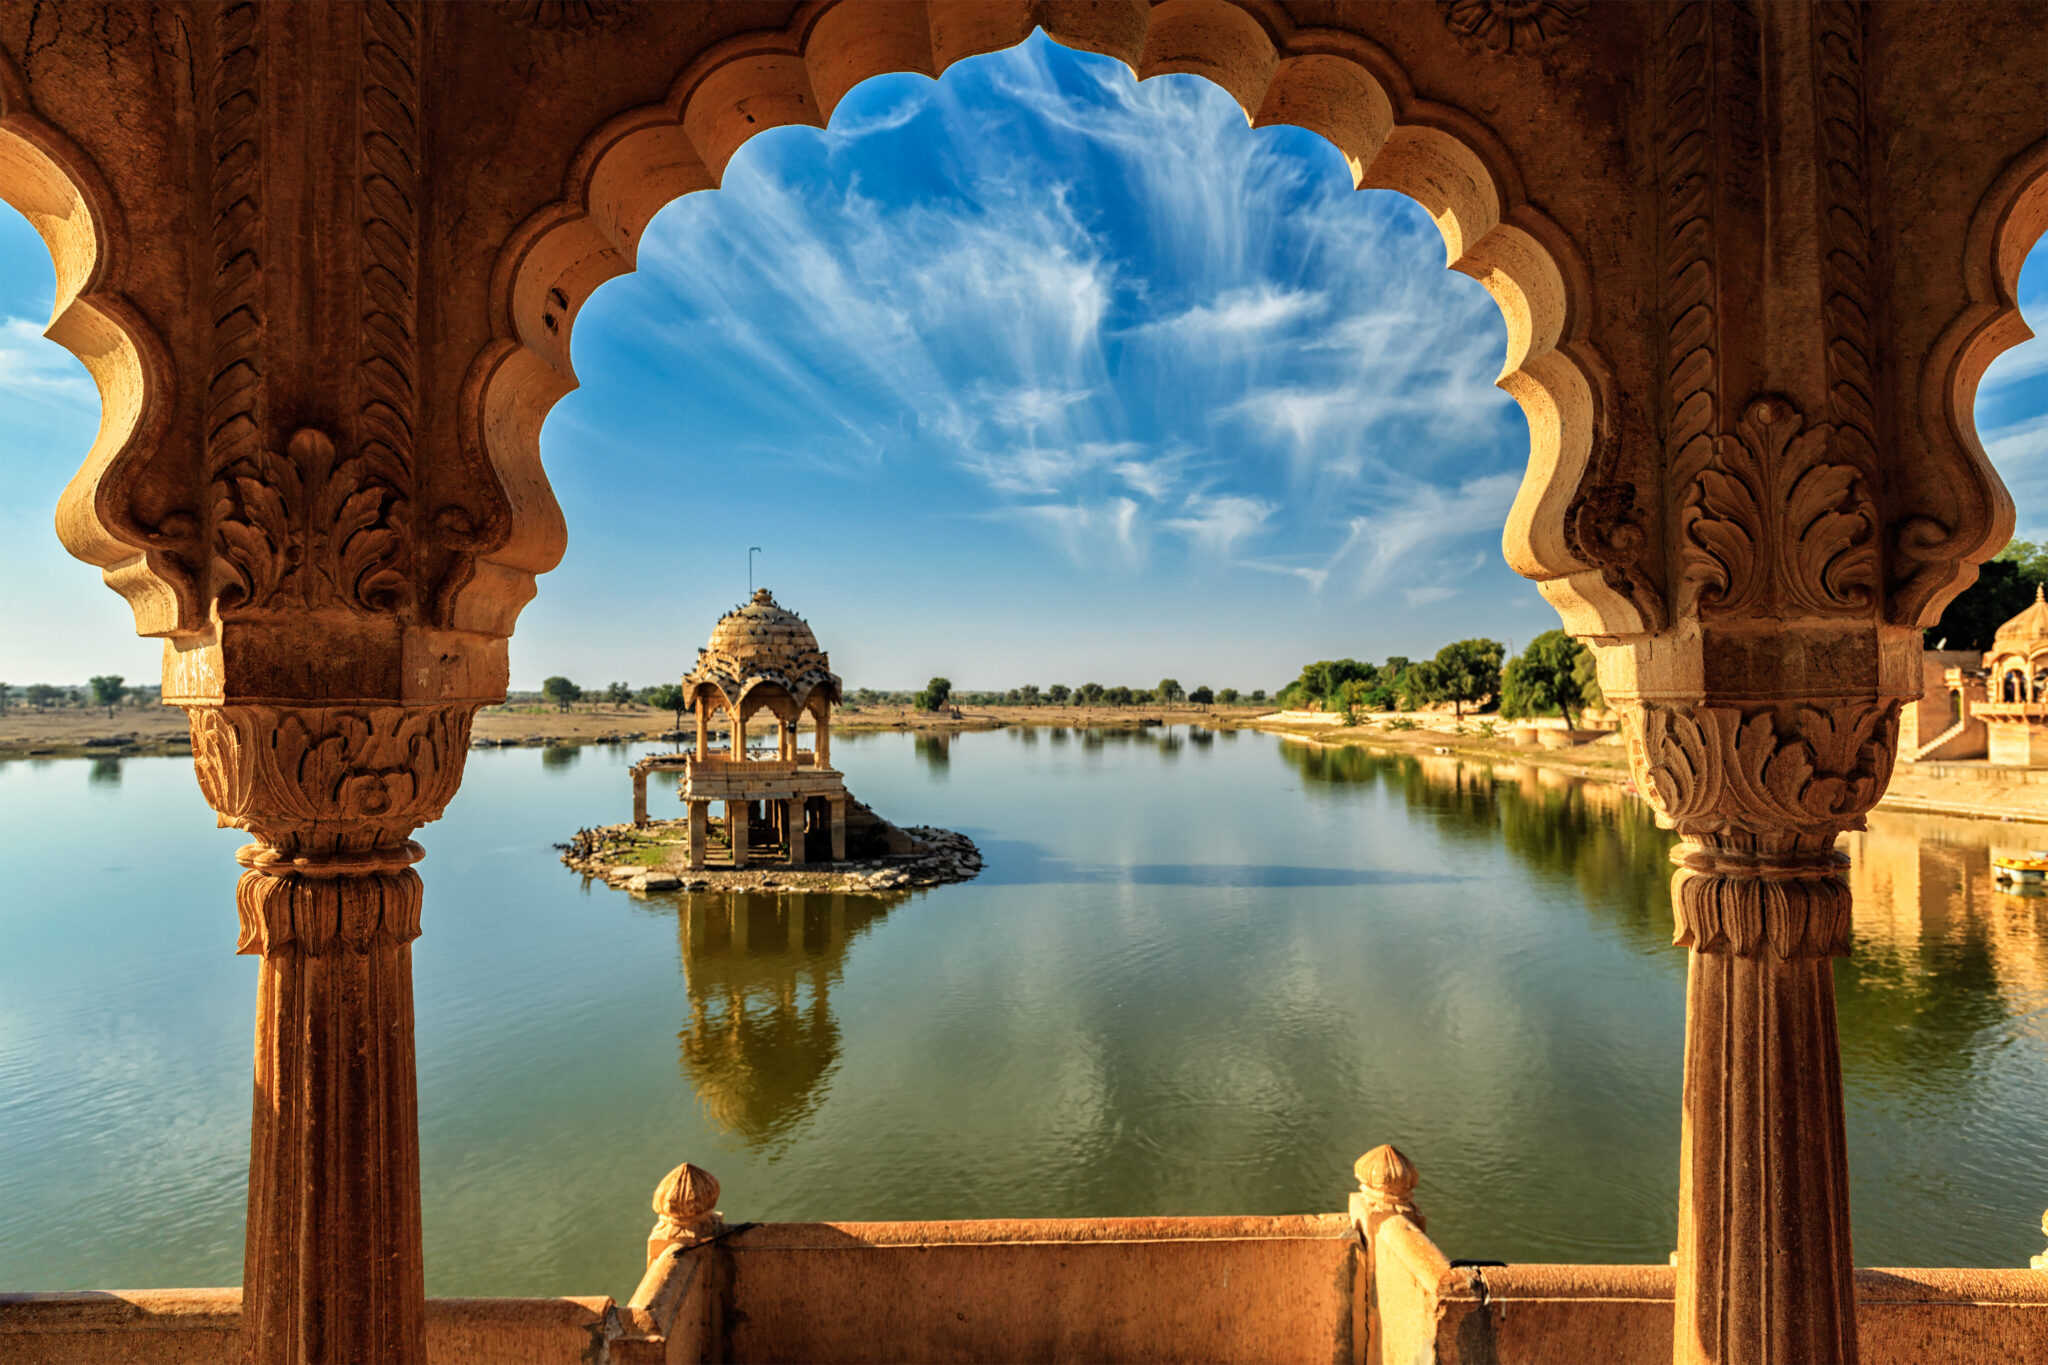 A scenic view of a historic pavilion with intricate carvings, standing on a small island, surrounded by a serene lake reflecting the blue sky and clouds. The photo is framed by the arch of a larger structure, enhancing the overall architectural beauty.